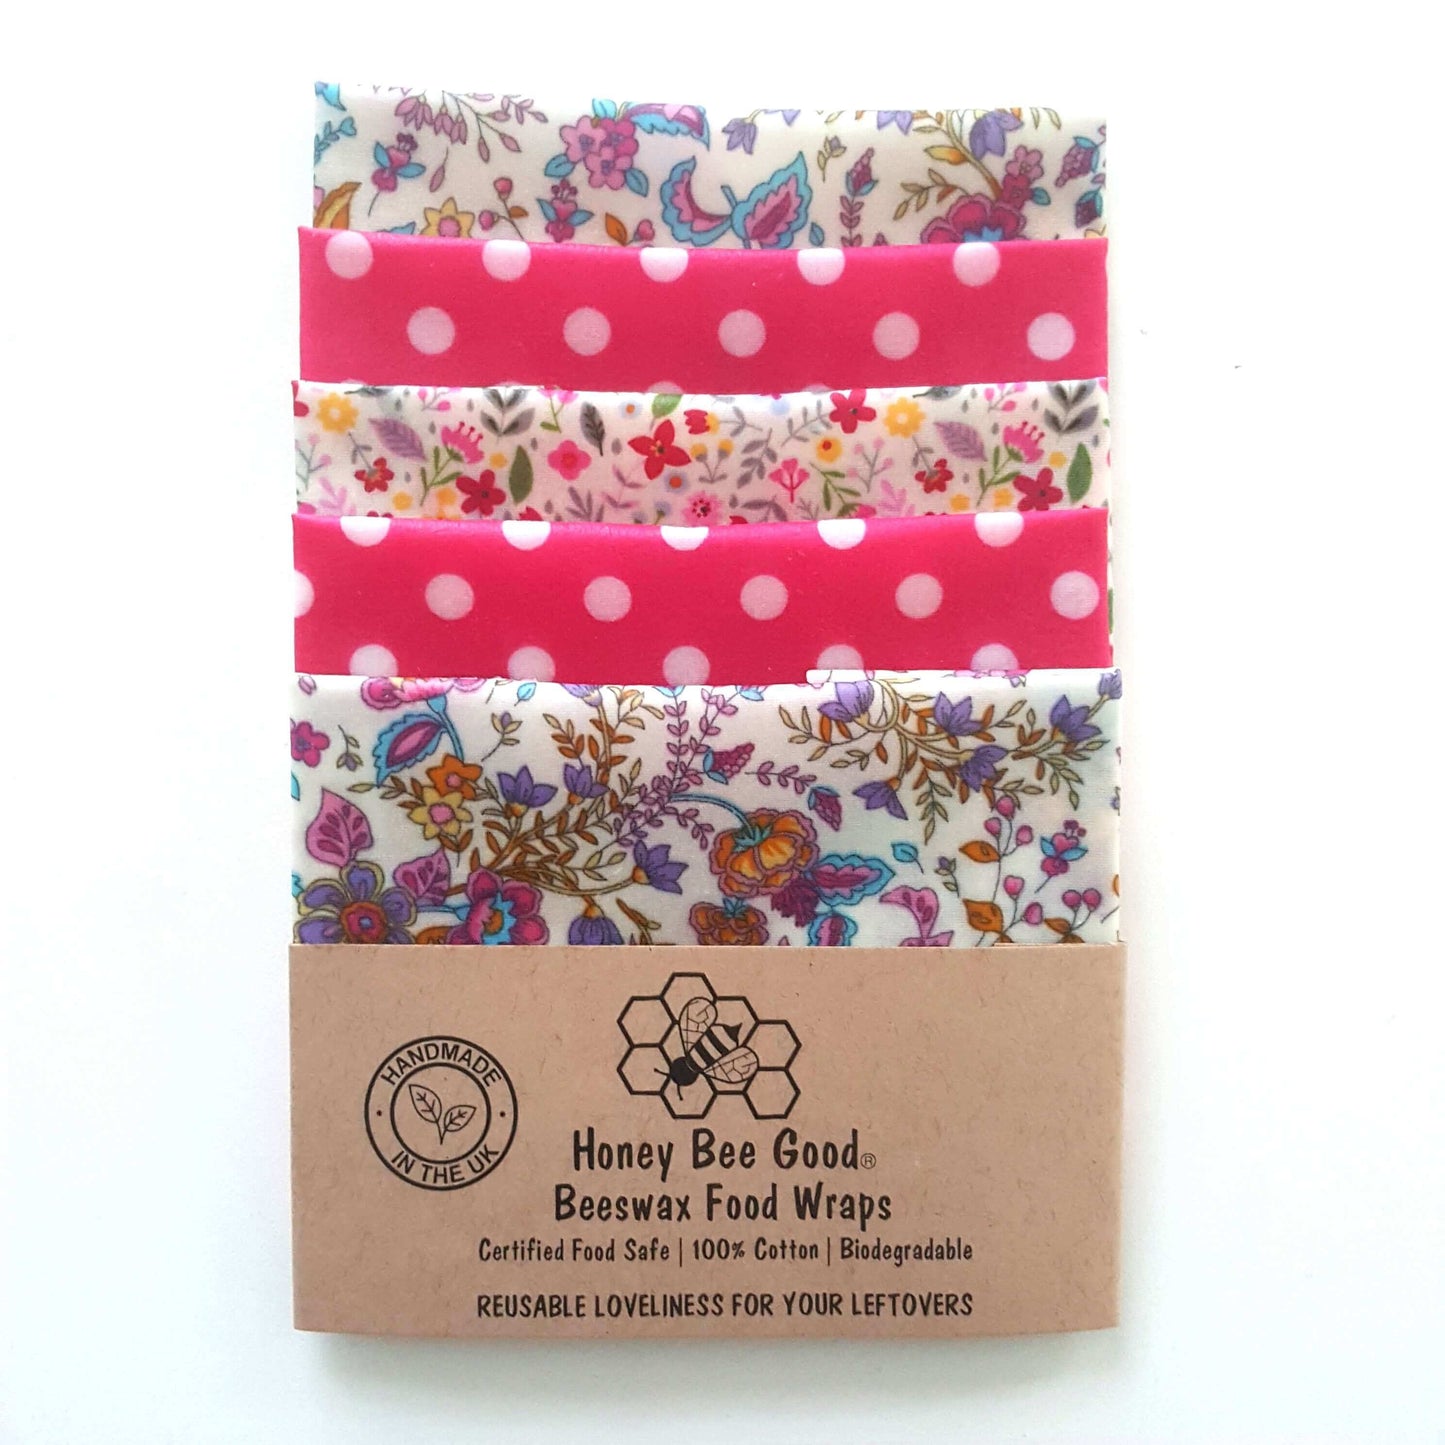 Reusable Beeswax Food Wraps 100% Hand Made in the UK by Honey Bee Good shown in Set of 5 Smalls